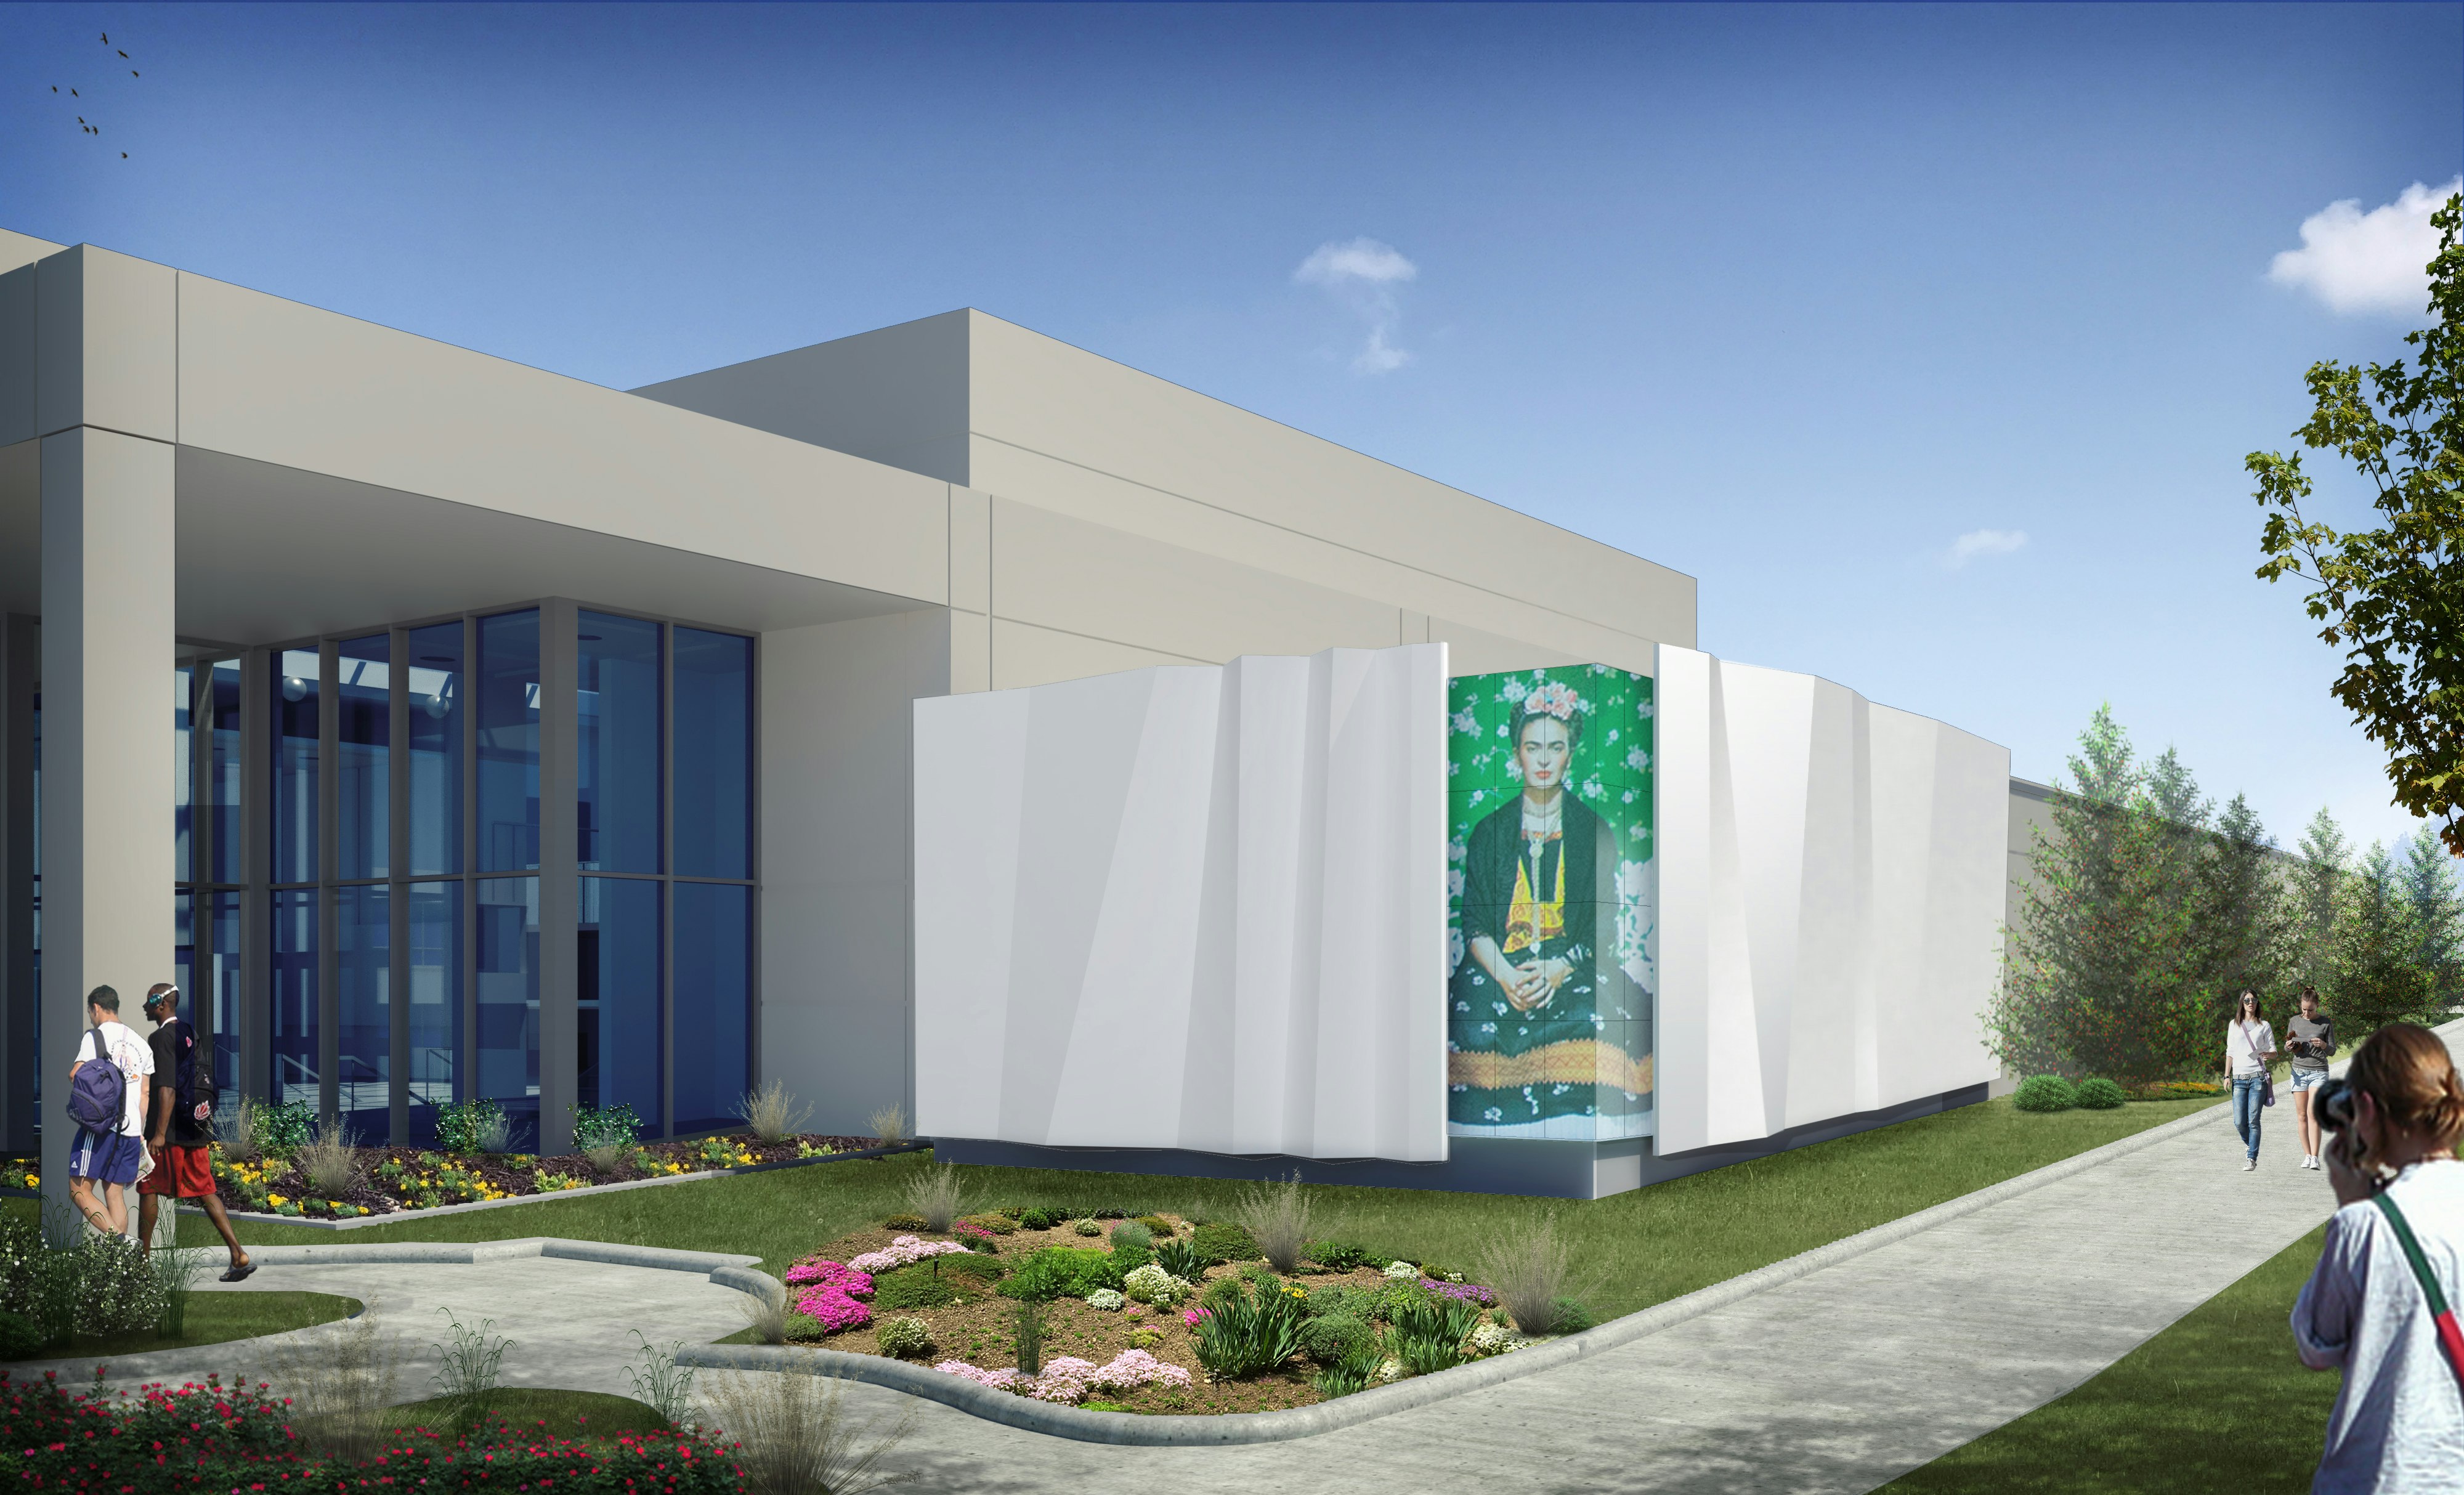 Rendering of Cleve Carney Museum of Art with a giant poster of Frida Kahlo on the side of the building